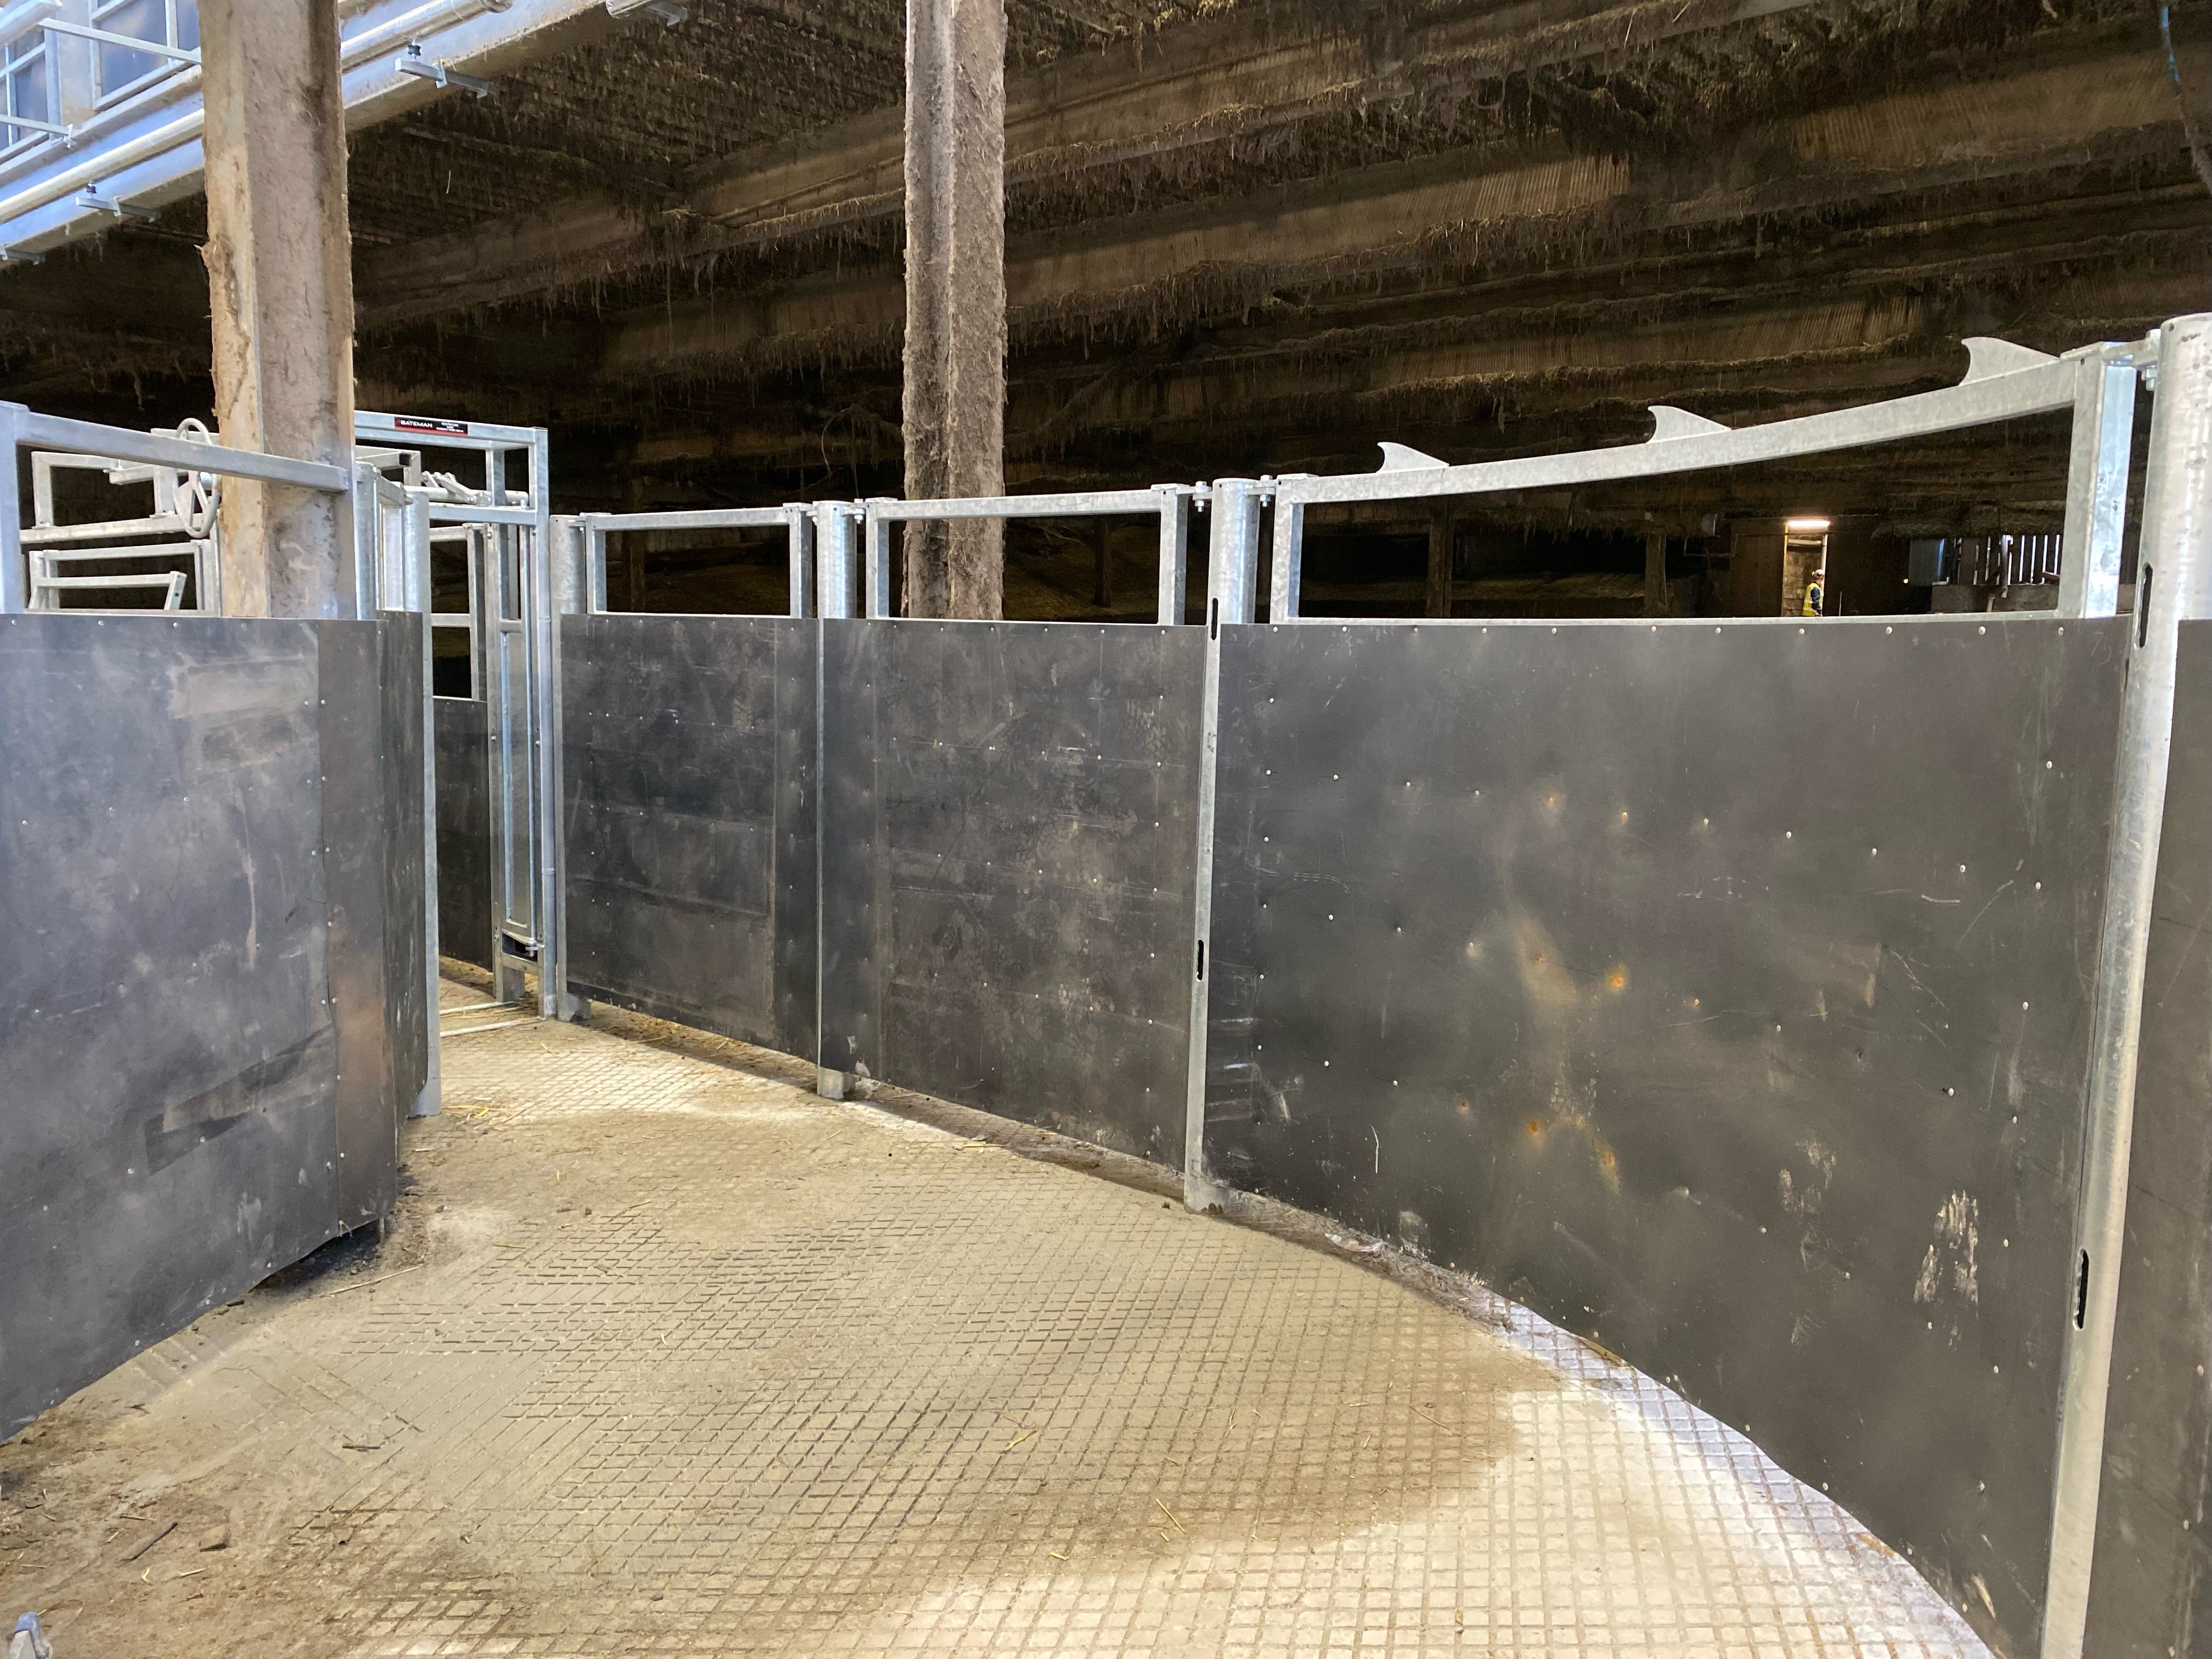 Cattle Handling Systems